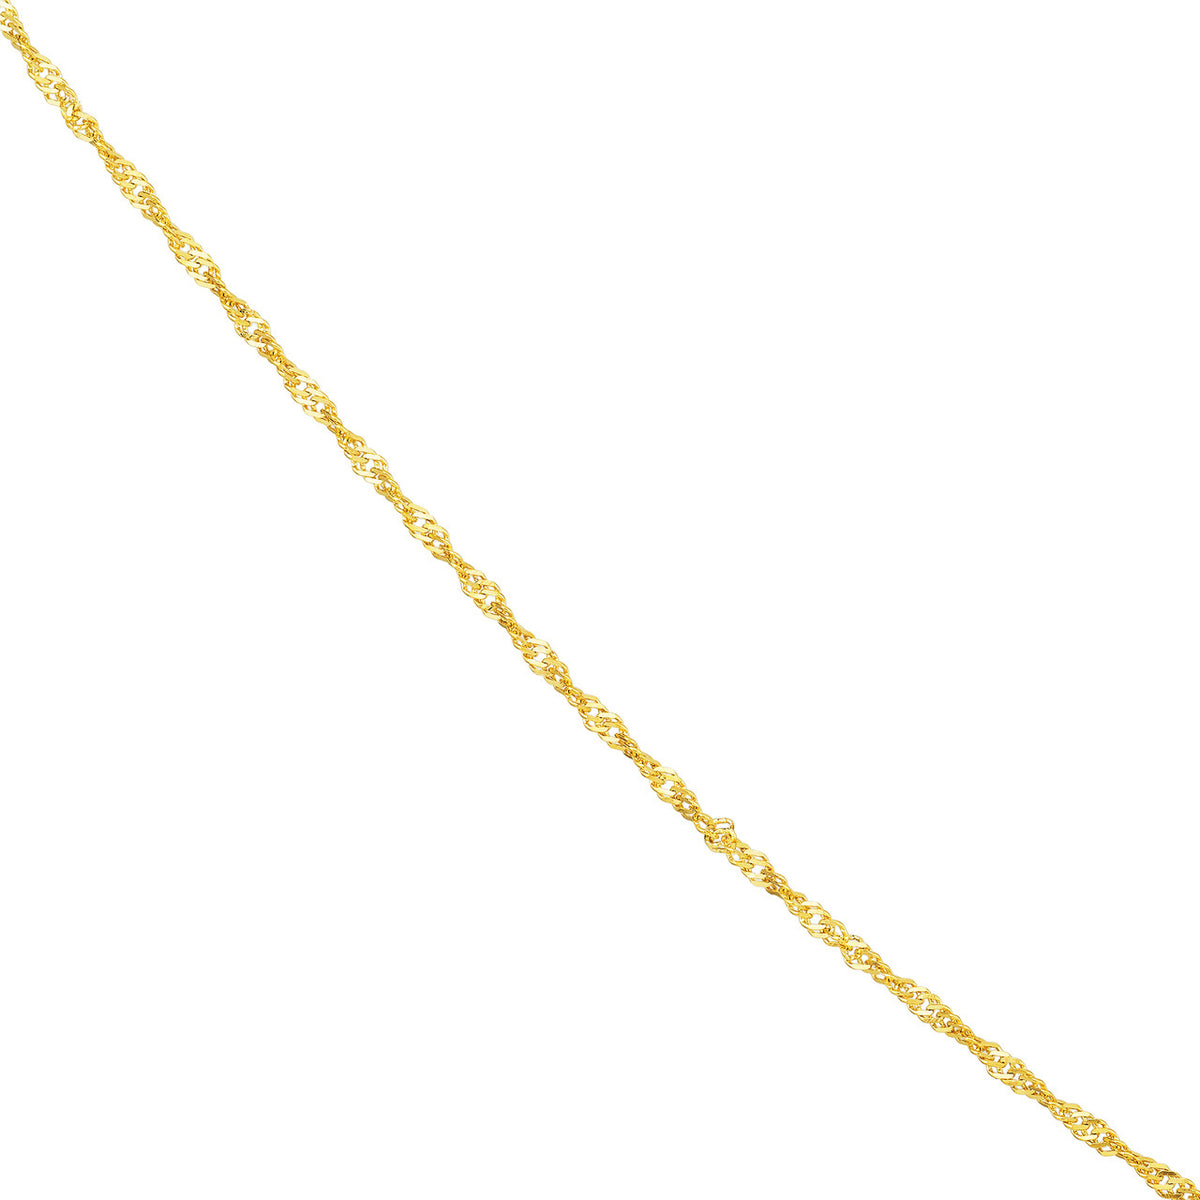 14K Yellow Gold or White Gold 1.15mm Singapore Chain Necklace with Lobster Lock